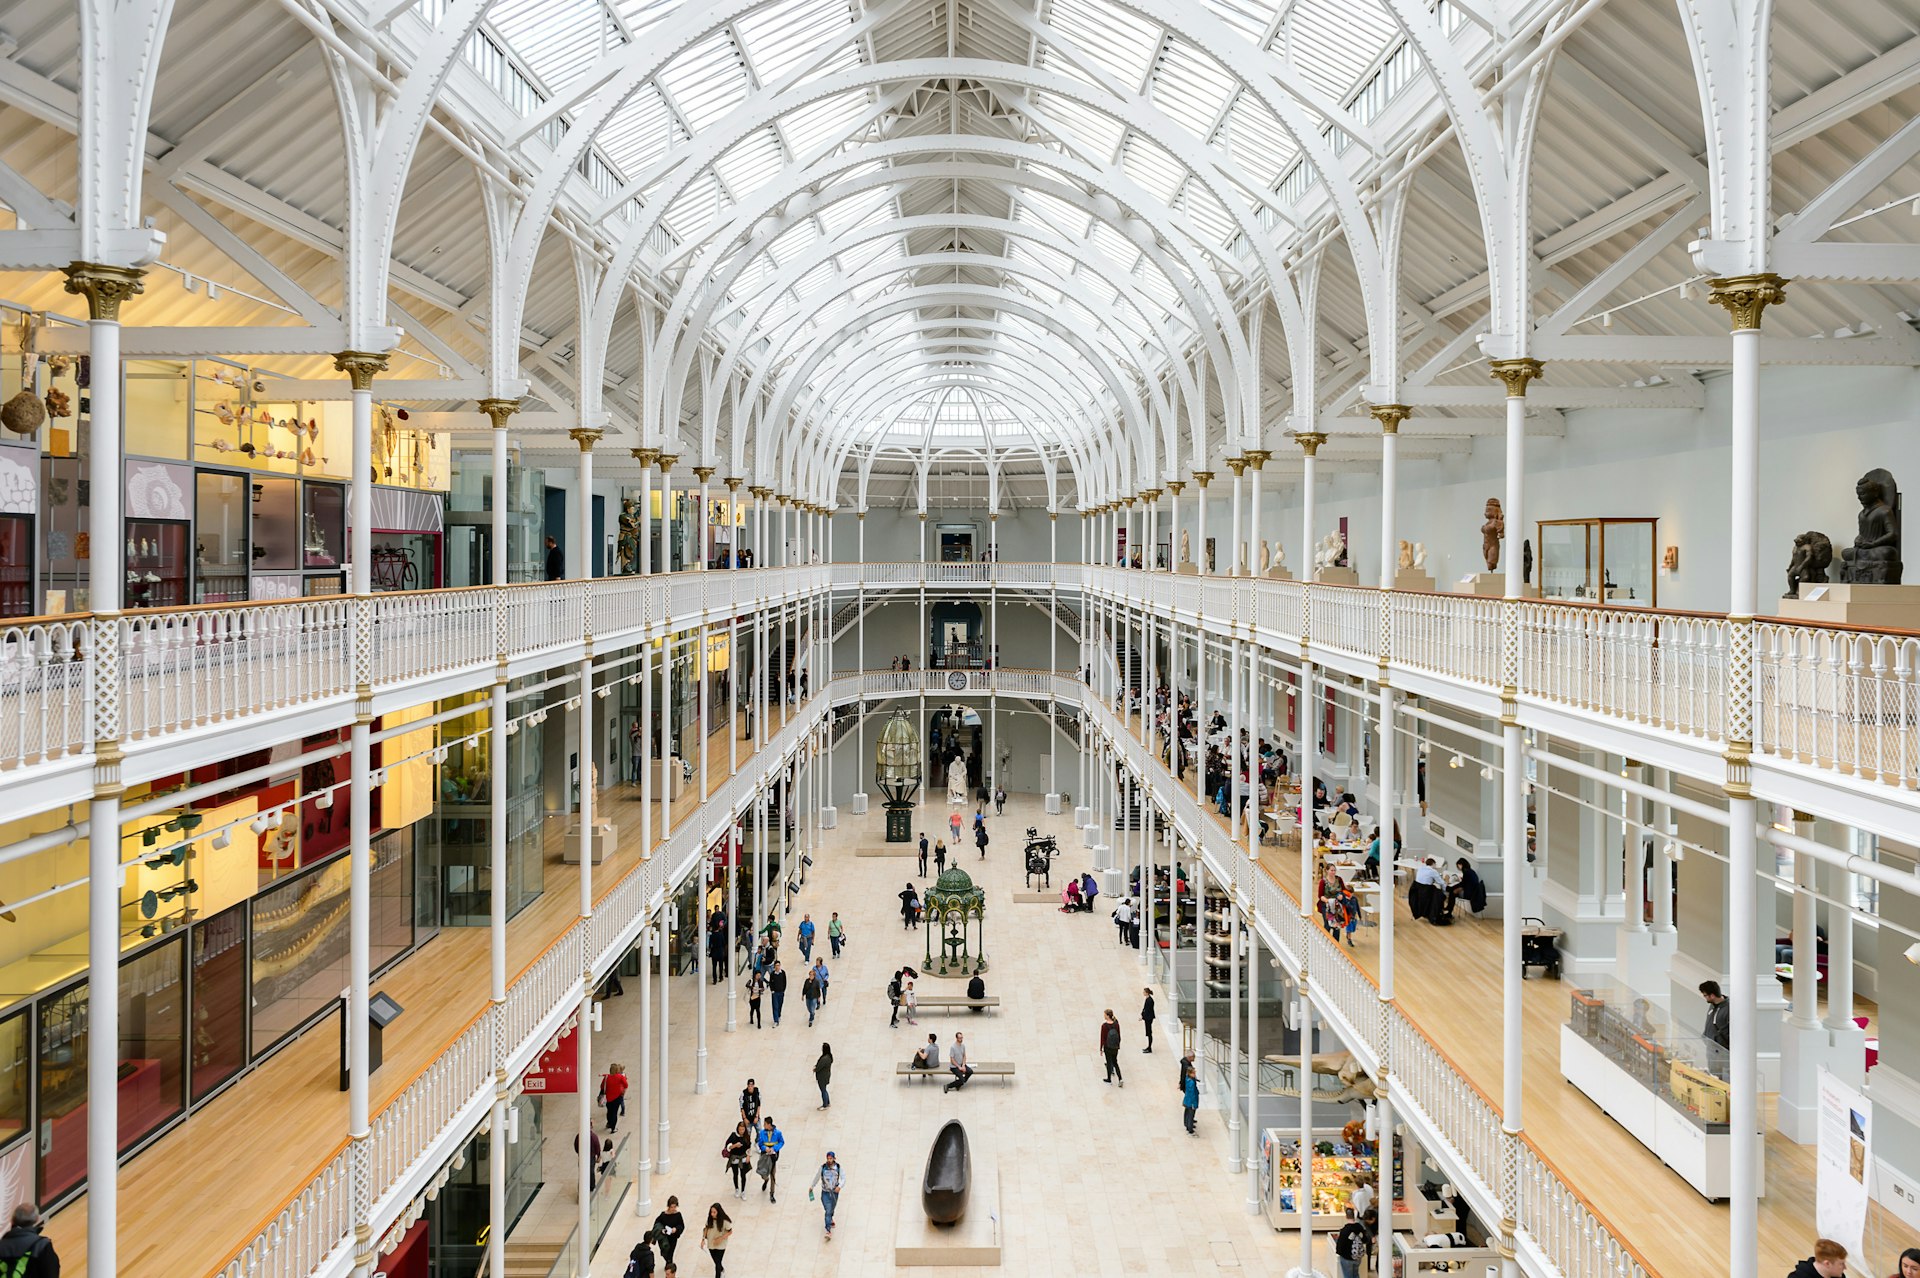 An aerial view of people walking through the Grand Gallery of the National Museum of Scotland.